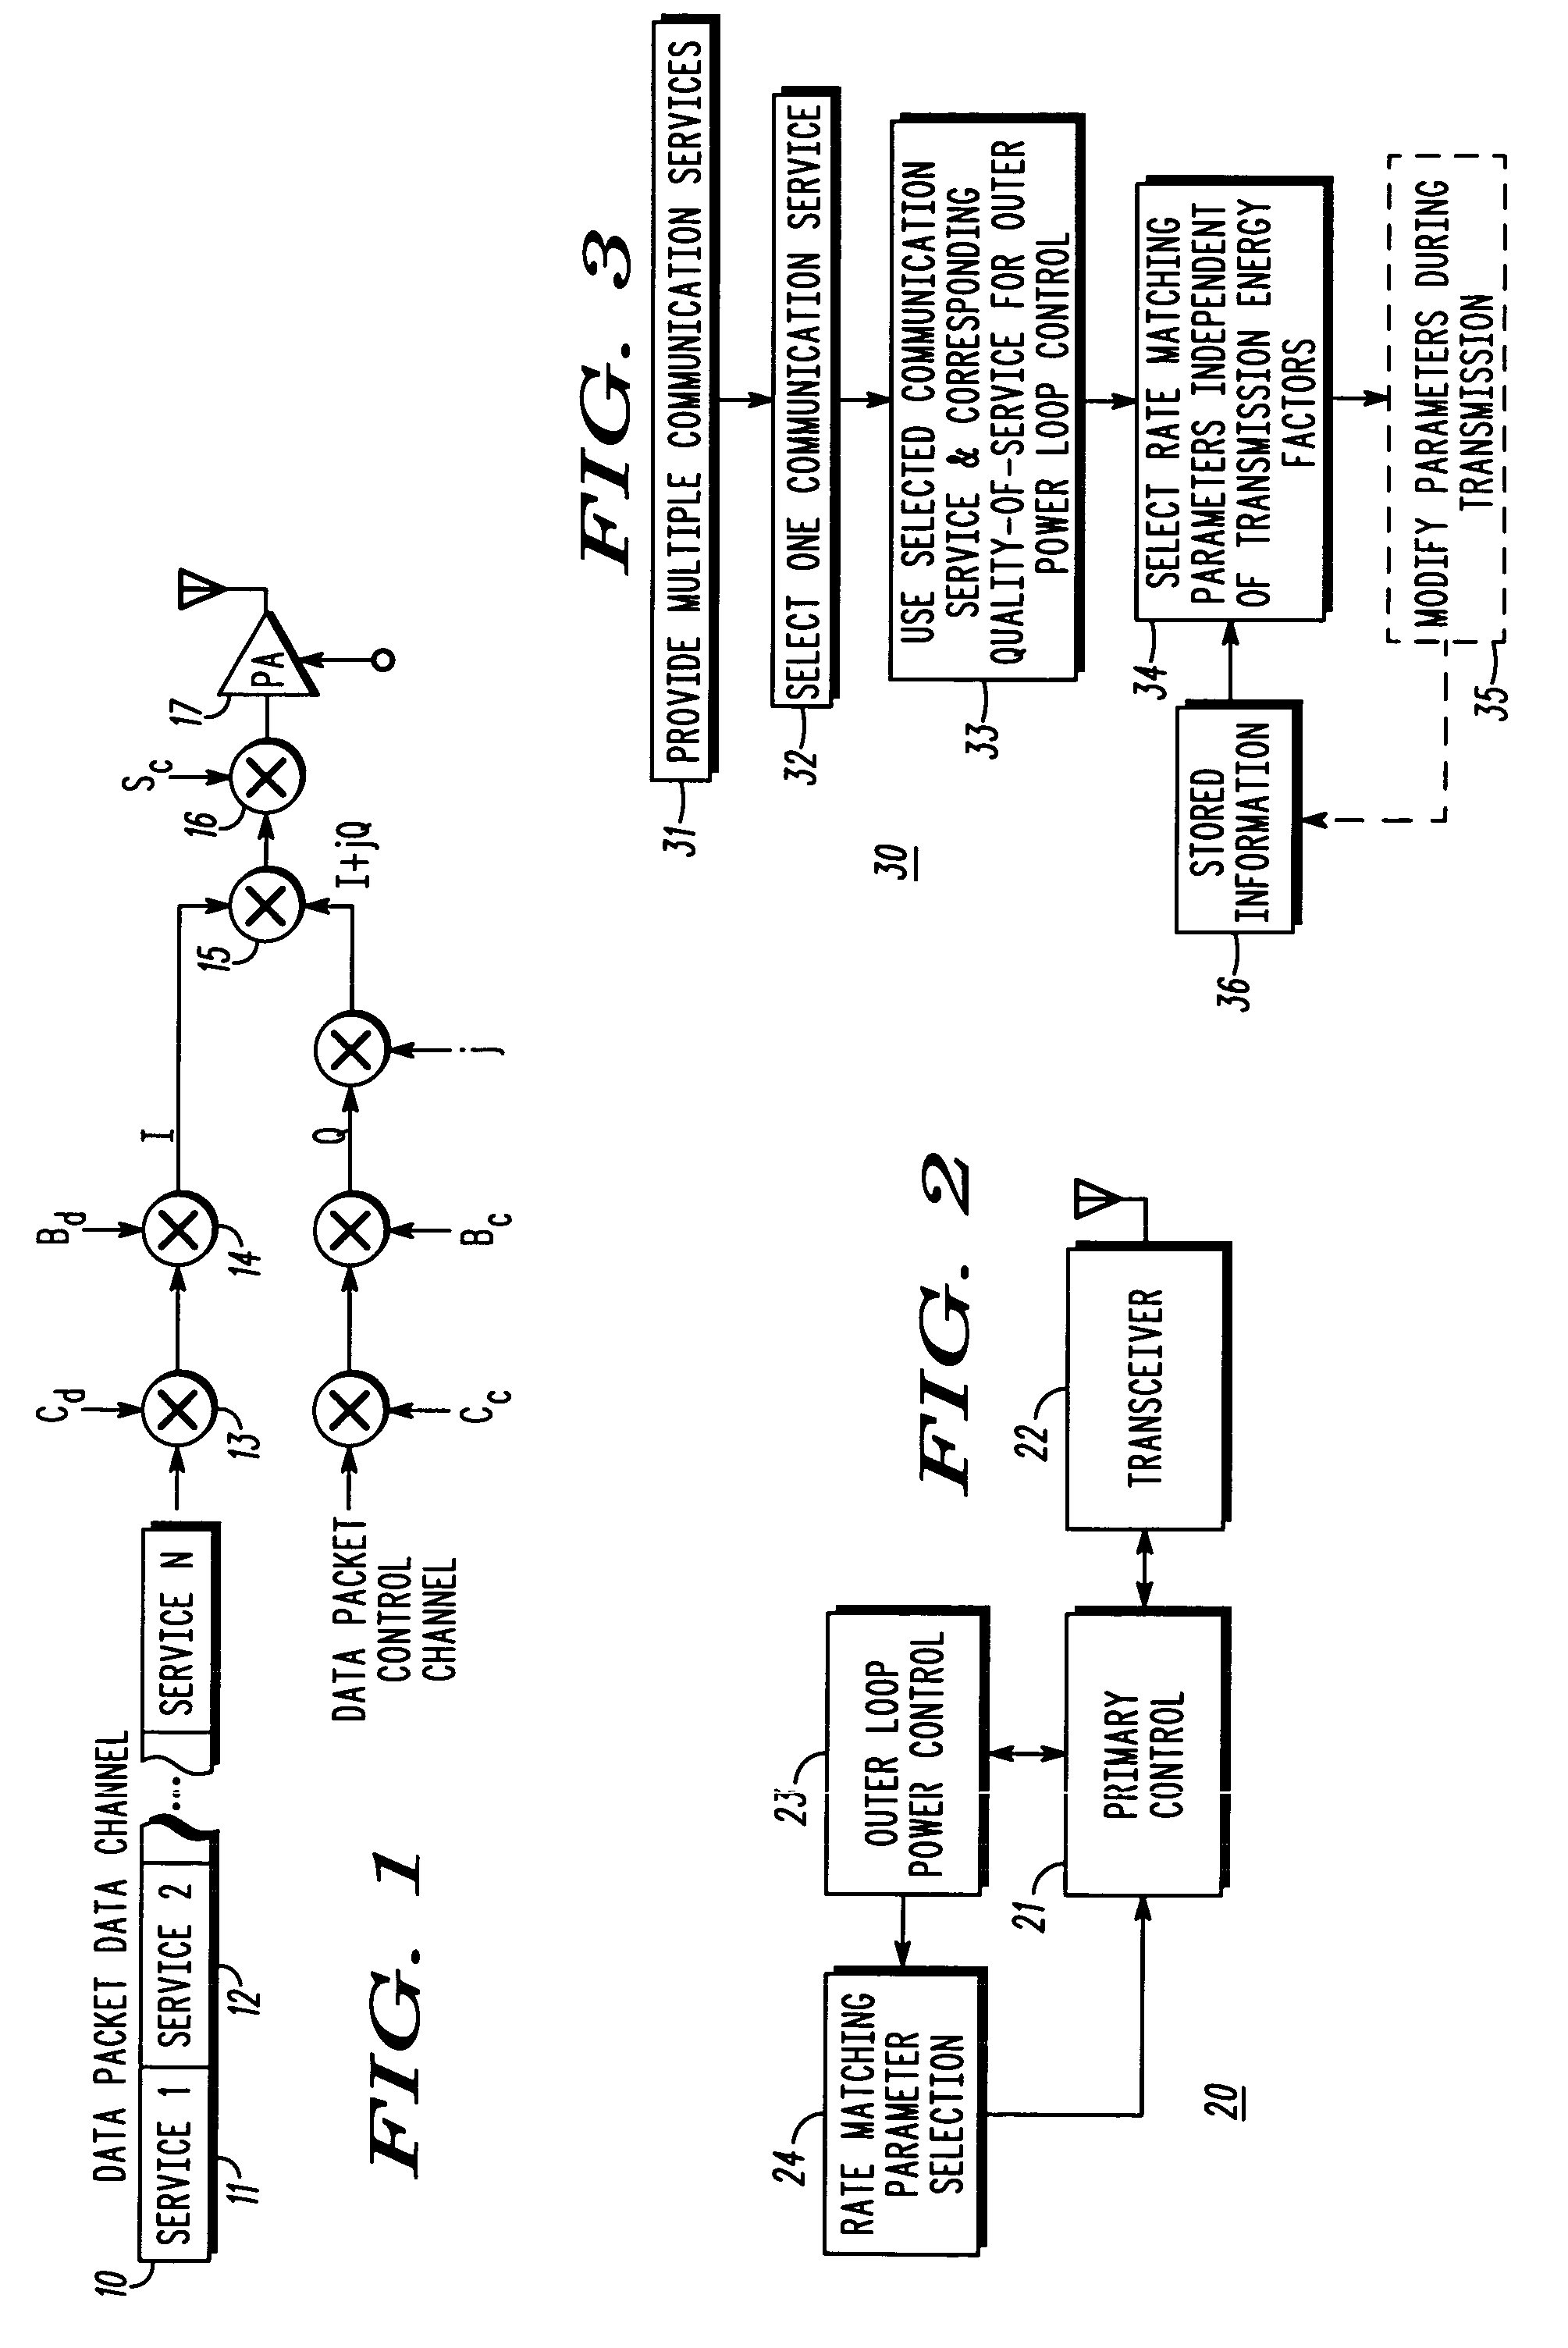 Method and apparatus to provide desired quality-of-service levels to multiple communication services